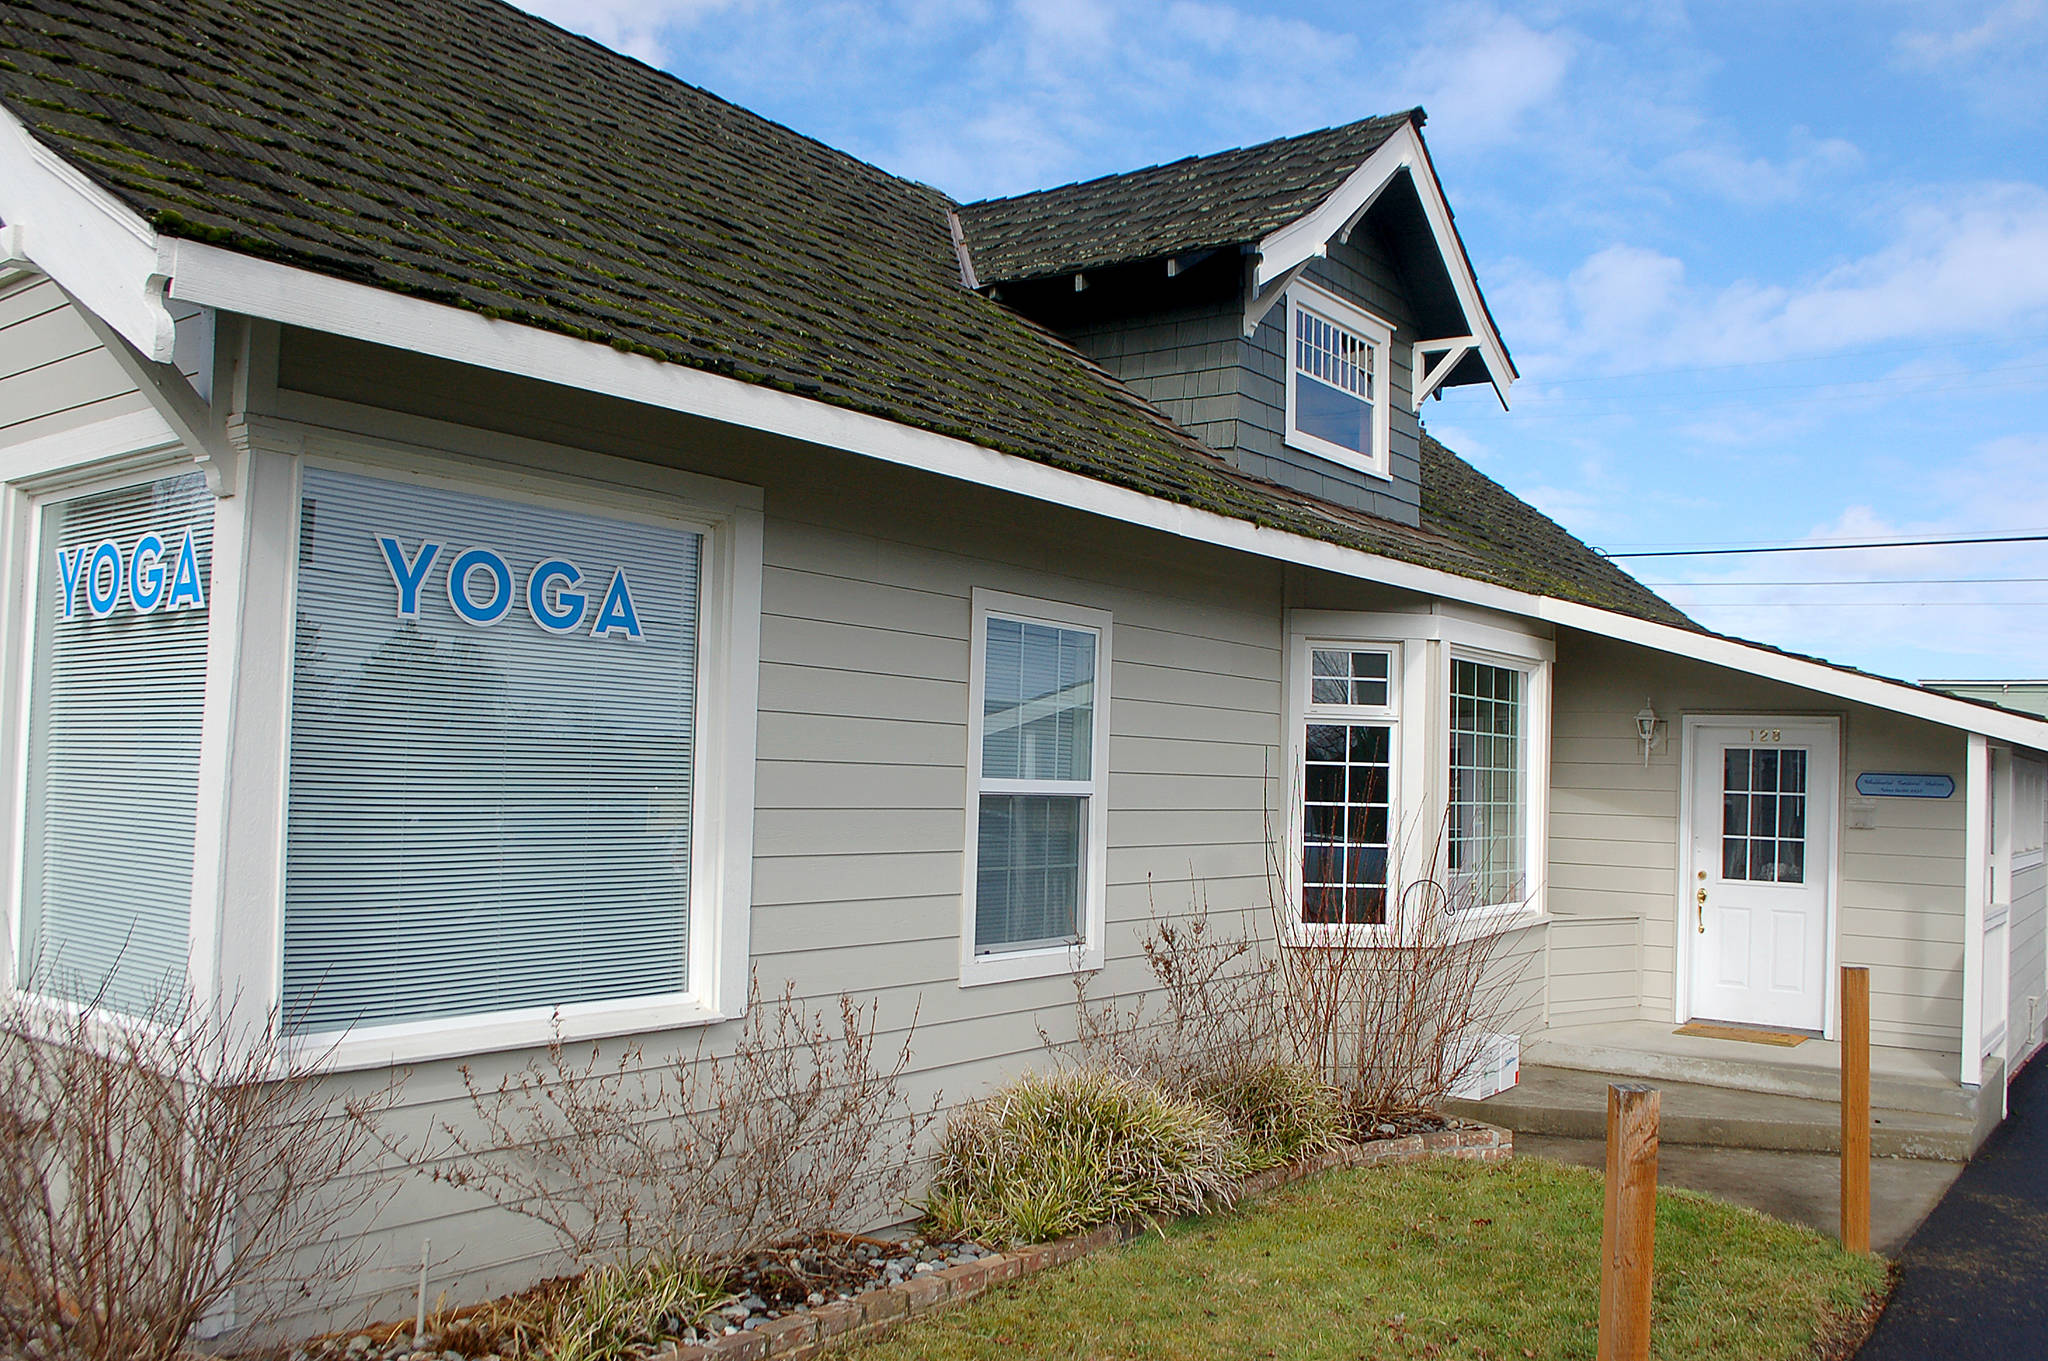 An exterior view of the Yoga-Sutras Institute at 128 W. Bell St. Sequim Gazette photos by Conor Dowley